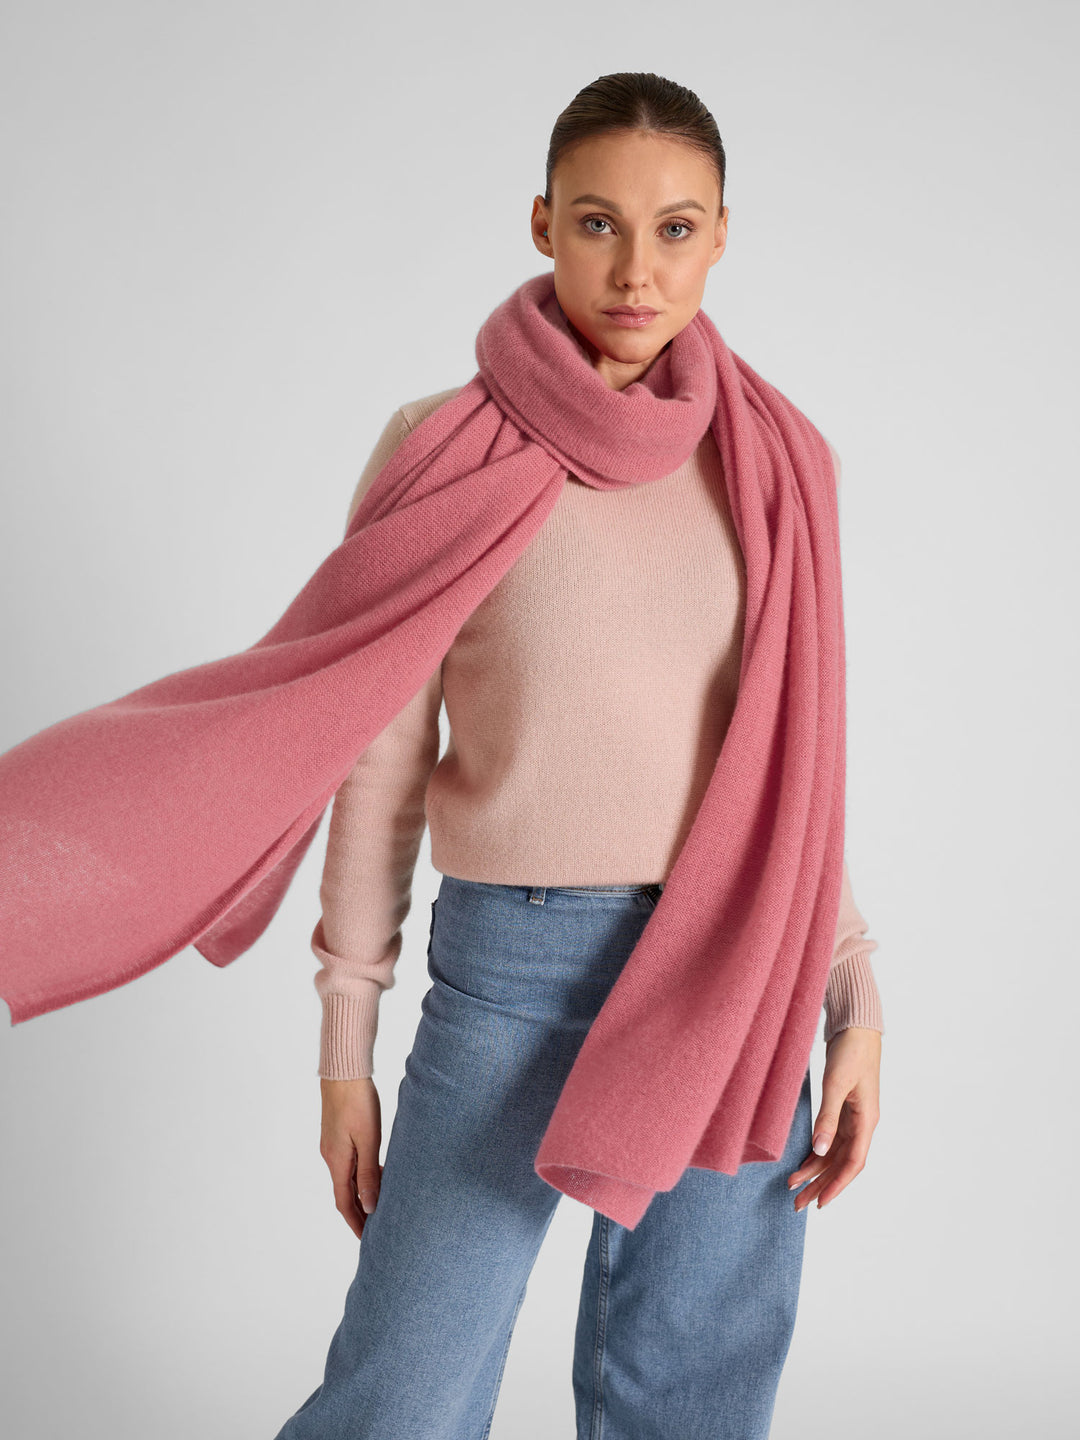 Airy cashmere scarf "Flow" in color: Pink Berry, in 100% cashmere by kashmina.